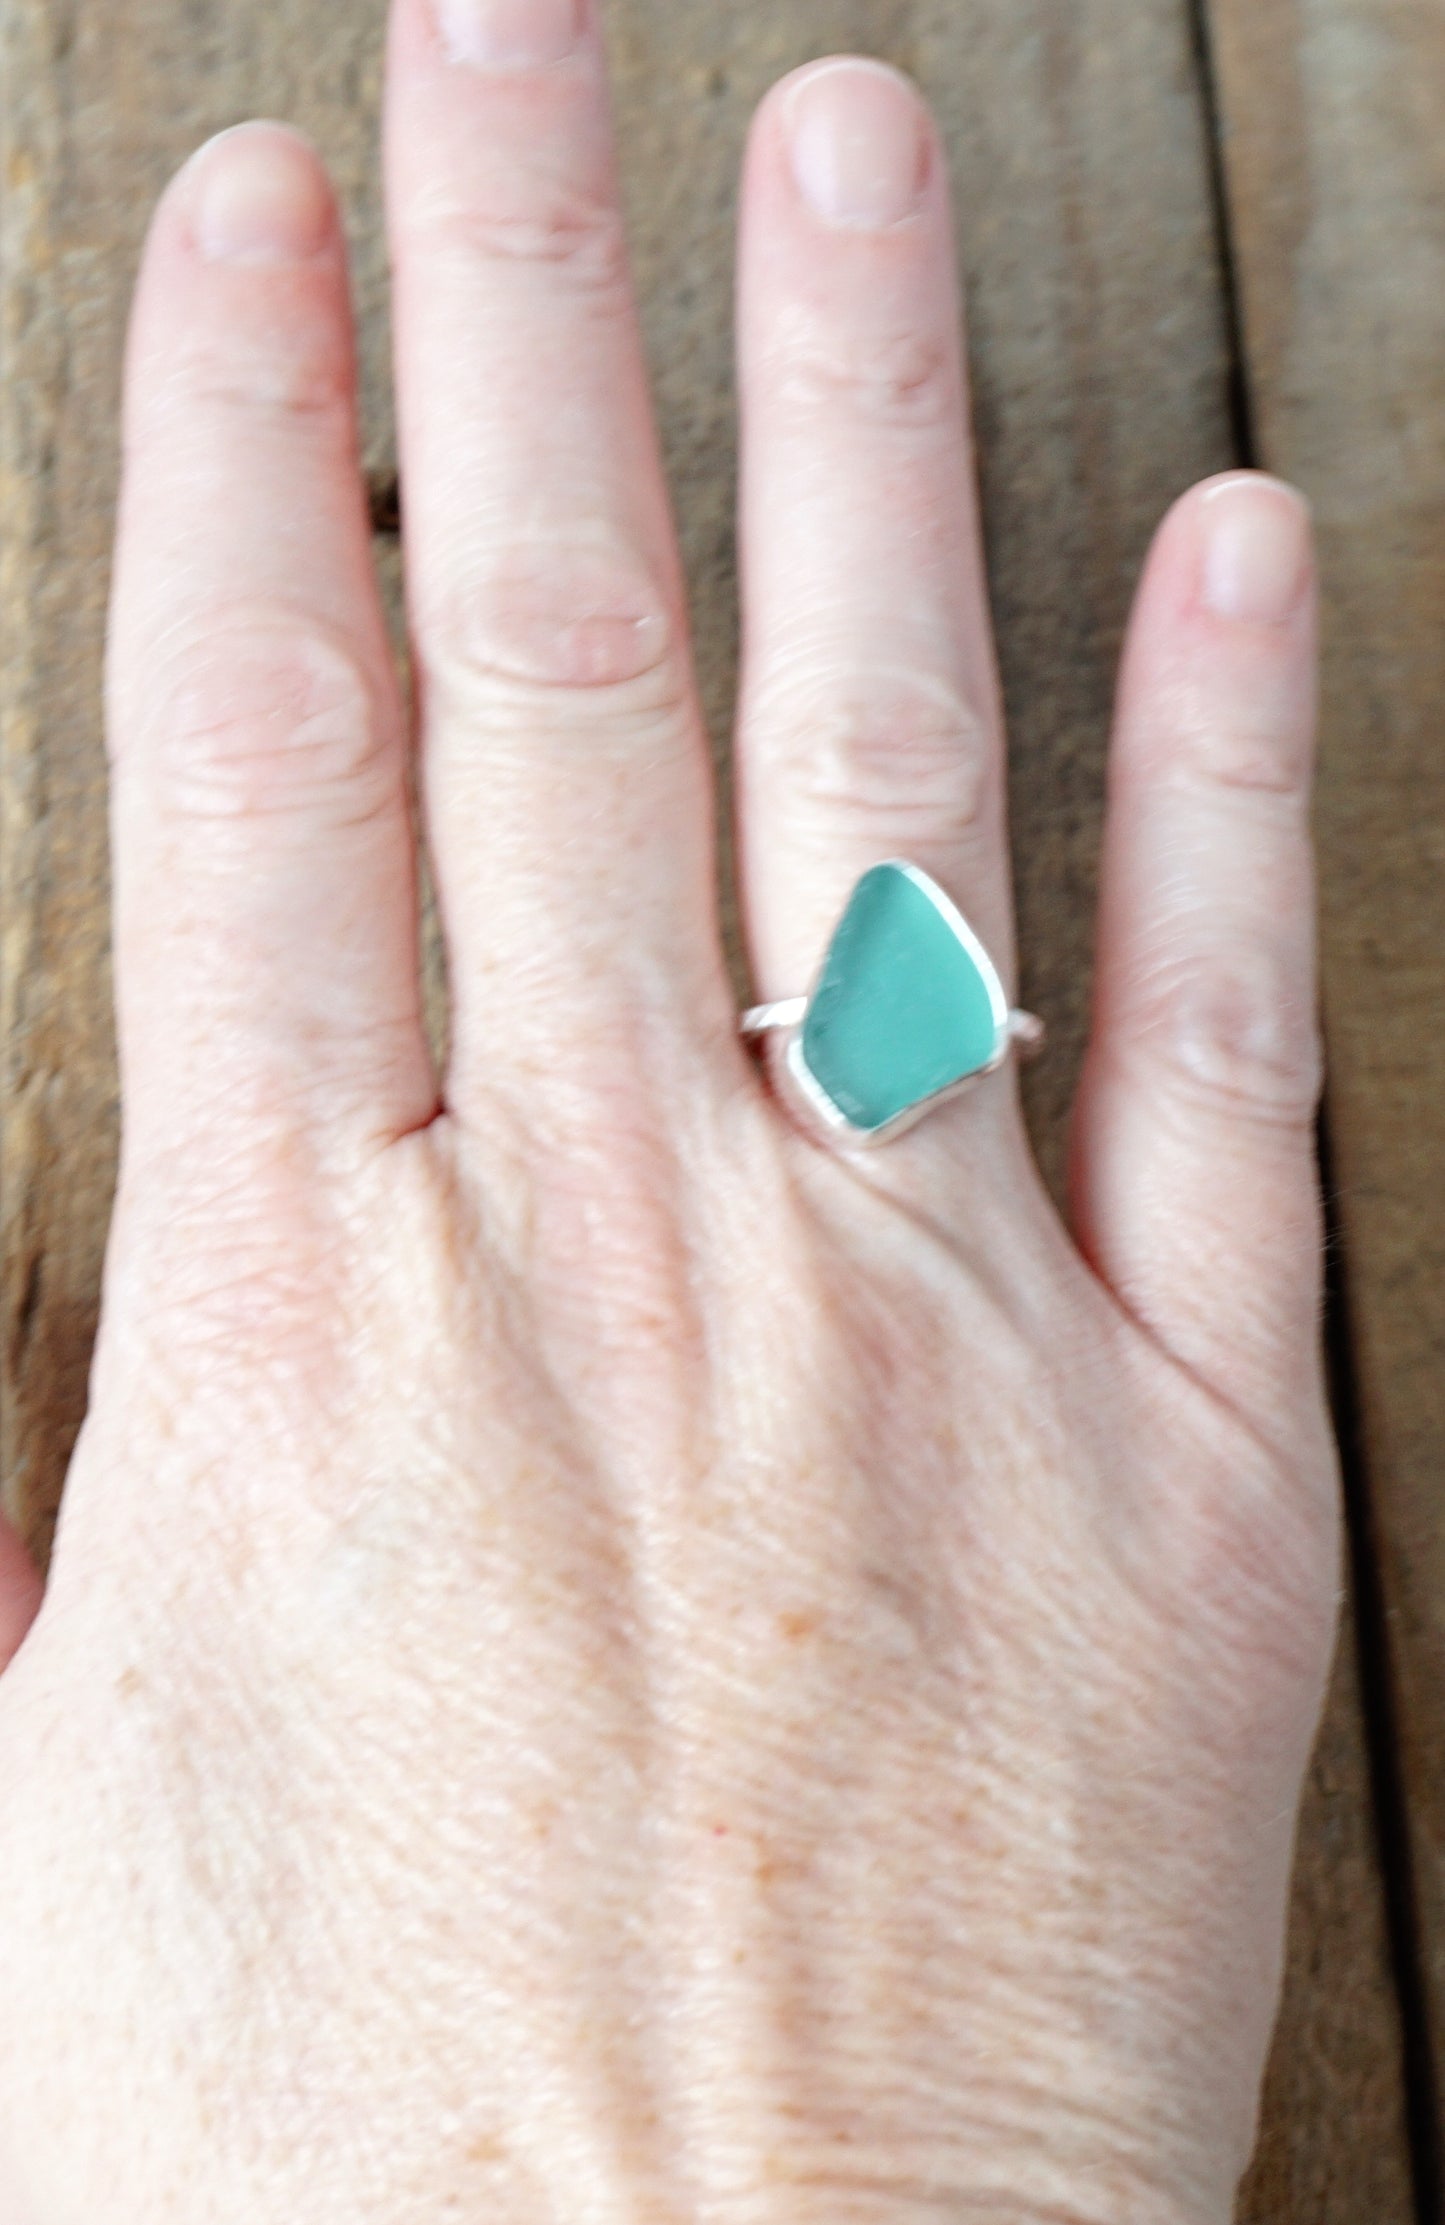 Size 7 1/2 Teal Blue Green Sea Glass Stacking Ring